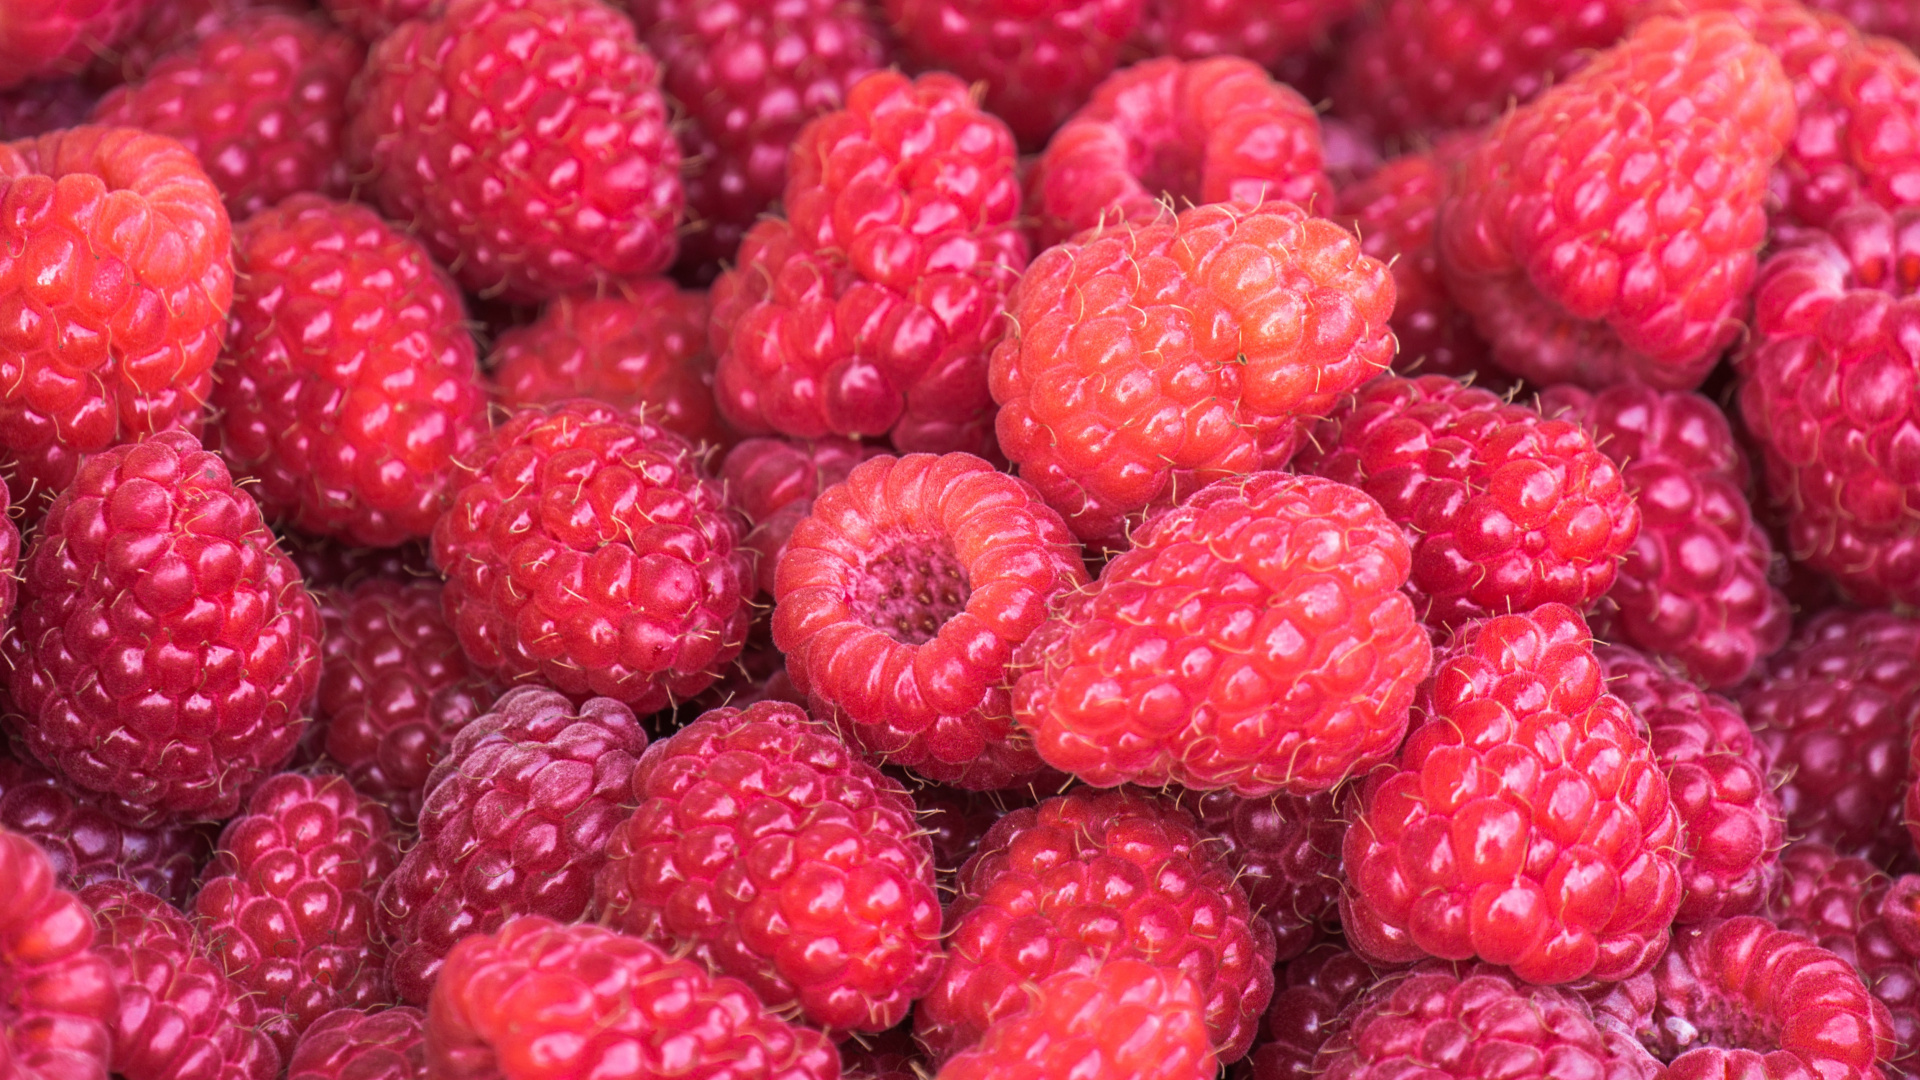 Red Raspberry Fruits in Close up Photography. Wallpaper in 1920x1080 Resolution